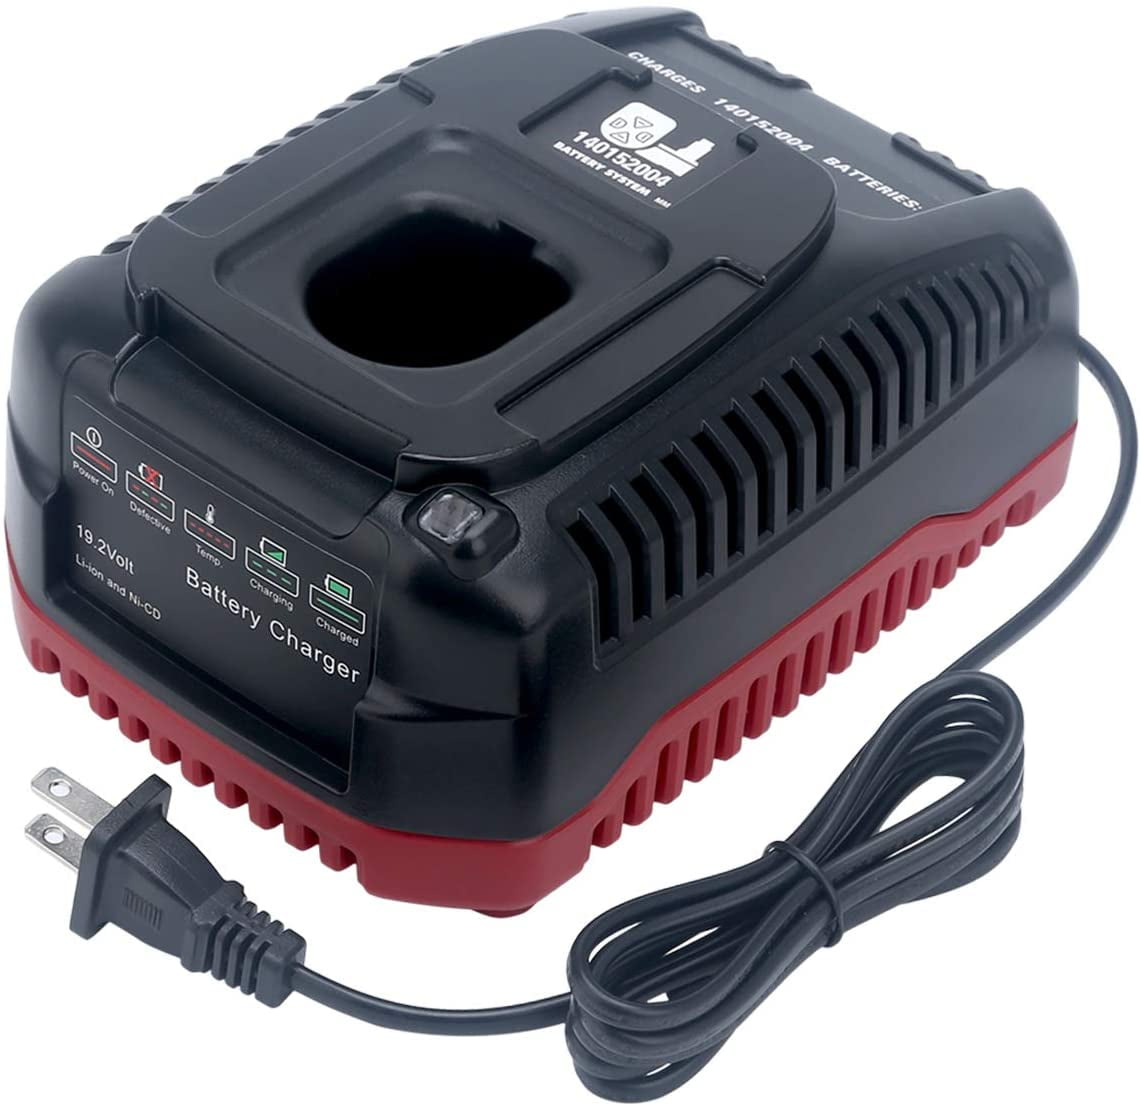 Craftsman 12V-19.2V Lithium-ion and Ni-Cd Battery Charger 315.CH2030  